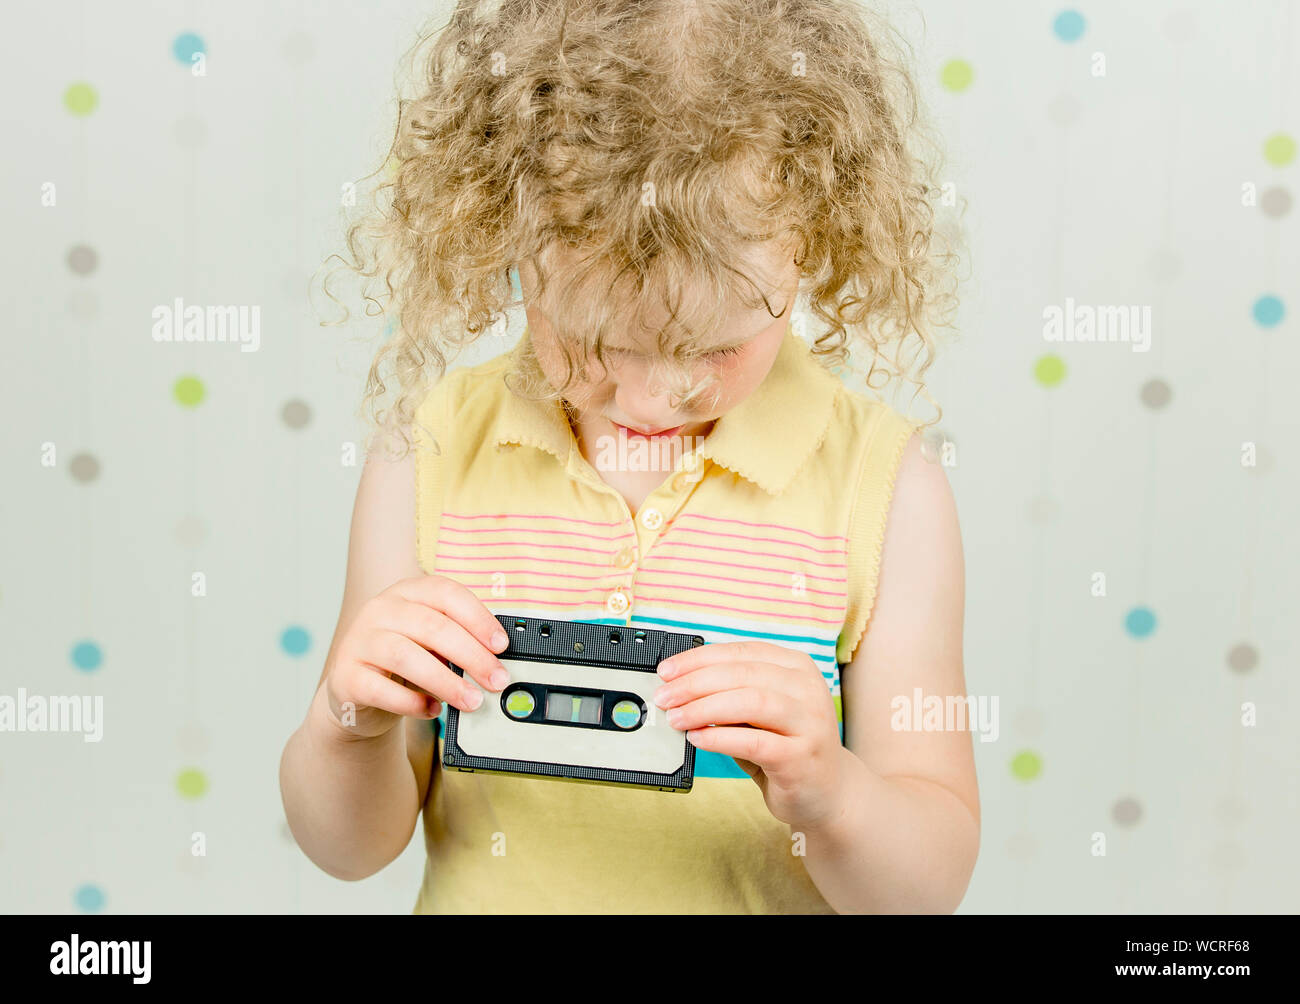 Funny picture of 5 year old girl holding and looking retro 80s cassette tape, being confused, what it is. Indoors, light spotty background. Stock Photo